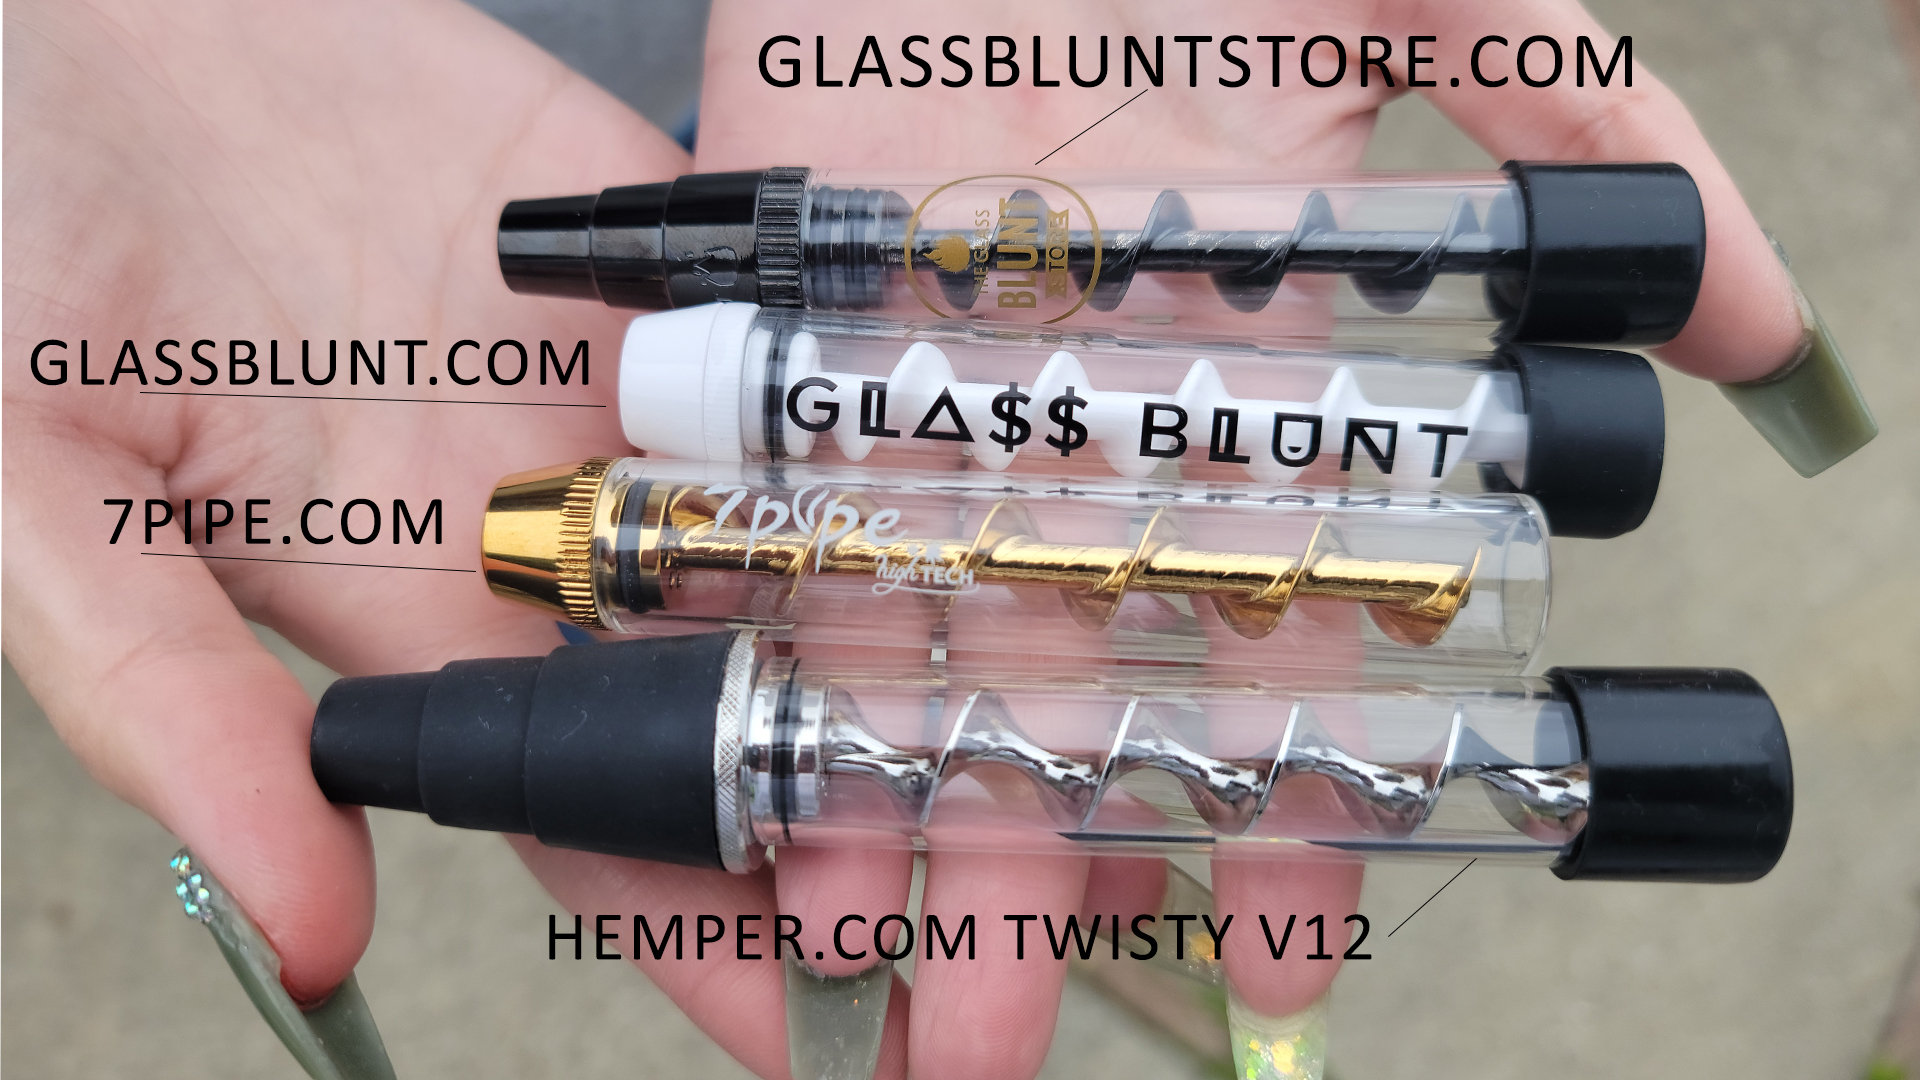 Which is the Best Glass Blunt Store in 2022? - Glassblunt